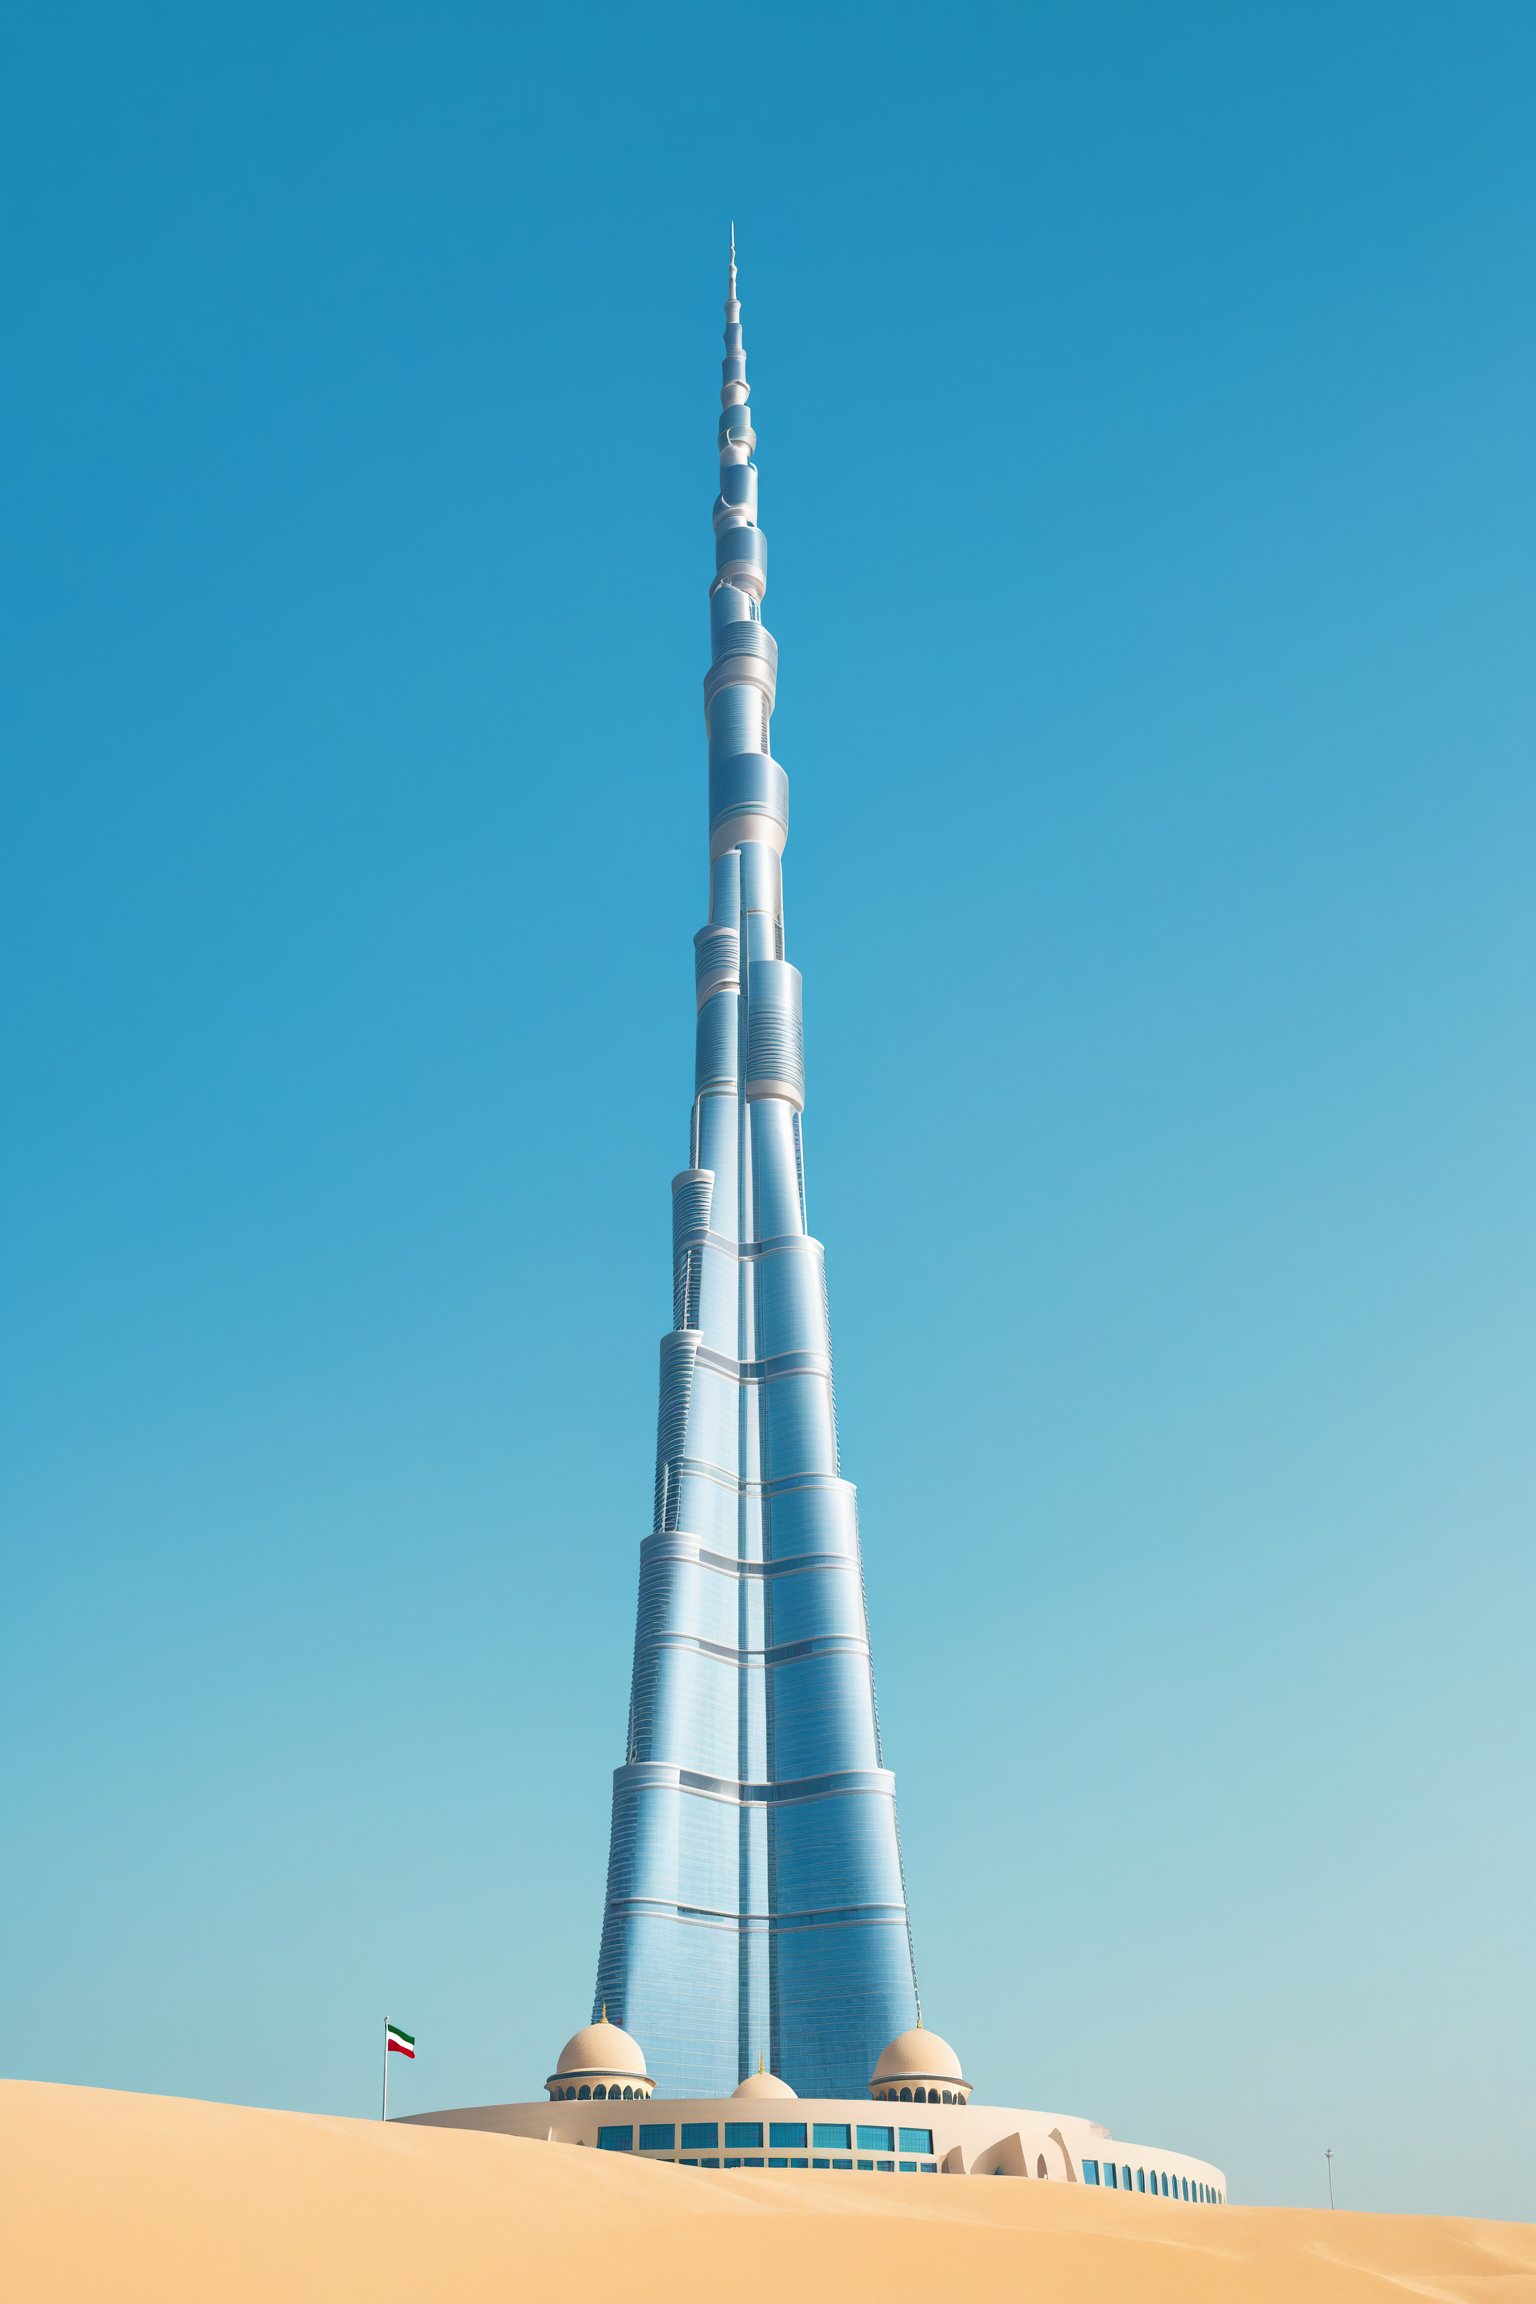 A flat design illustration of the Khalifa Tower in the United Arab Emirates. The tower should be centered in the image with a plain flat blue background . Use soft colors and no textures. Ensure there are no other objects in the image. The overall look should be calm and aesthetic. The design should be in 4K resolution.

,Helltaker style